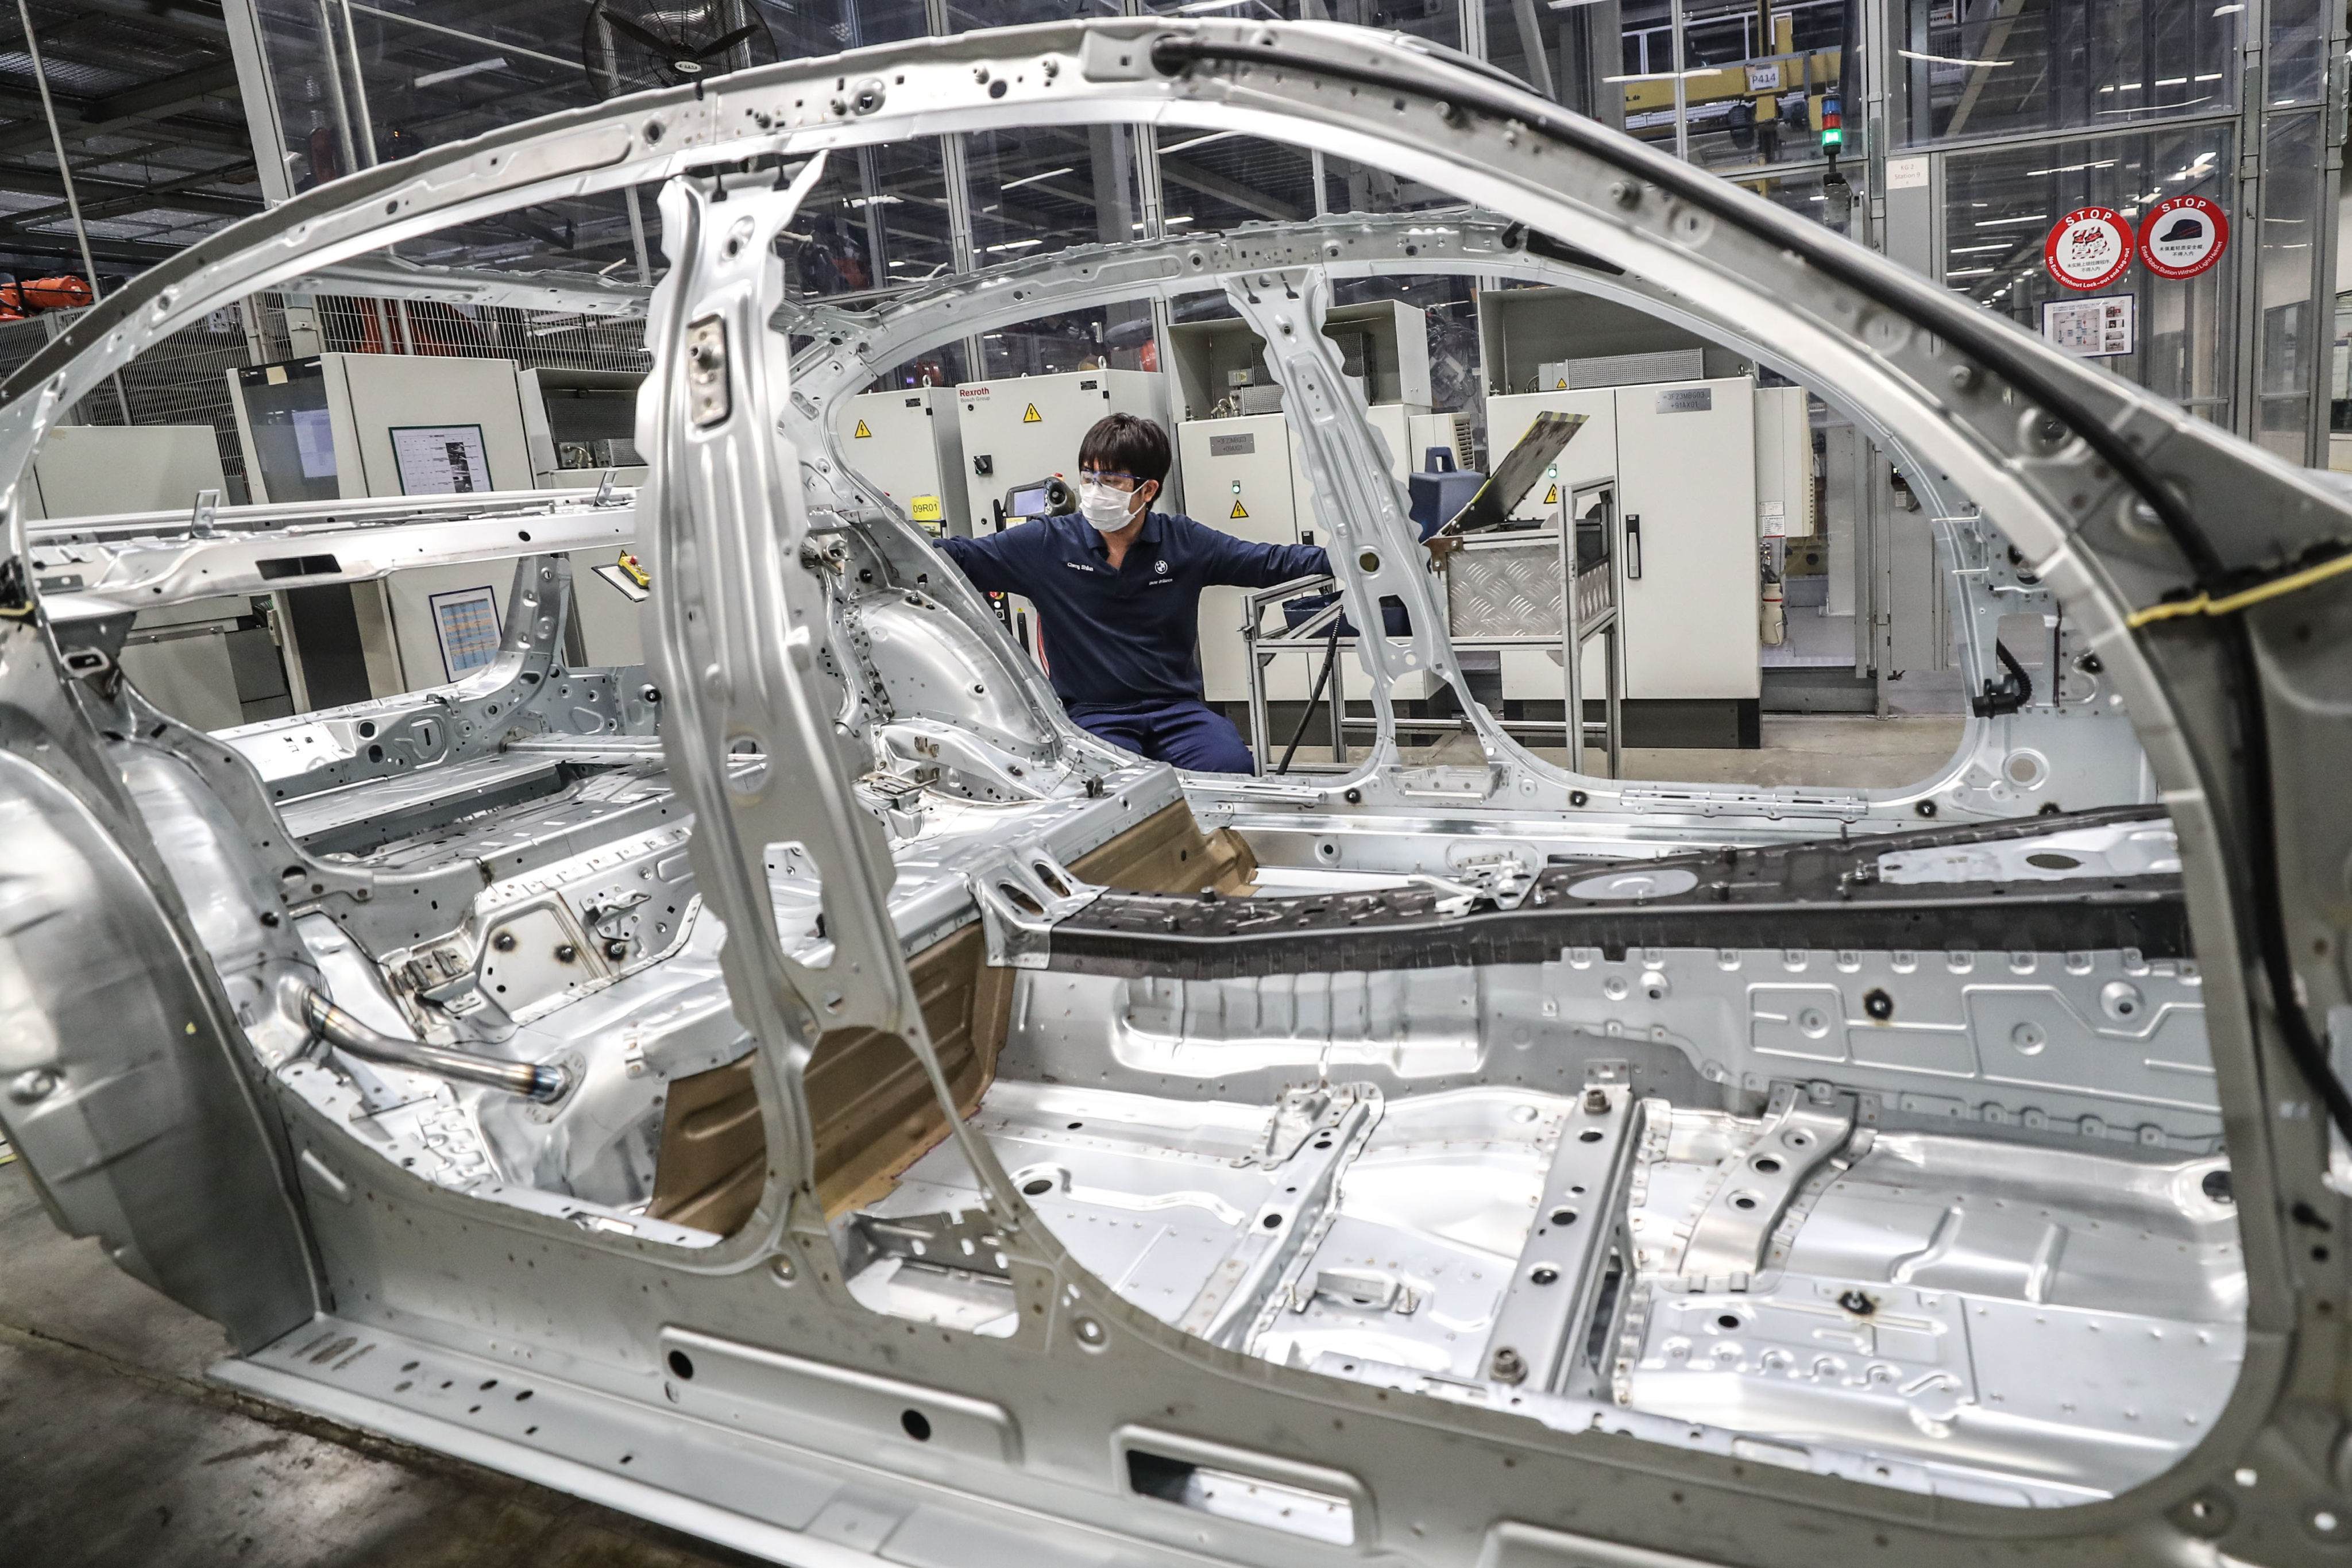 BMW AG opened a multibillion-dollar factory extension in Shenyang earlier this year. Photo: Xinhua